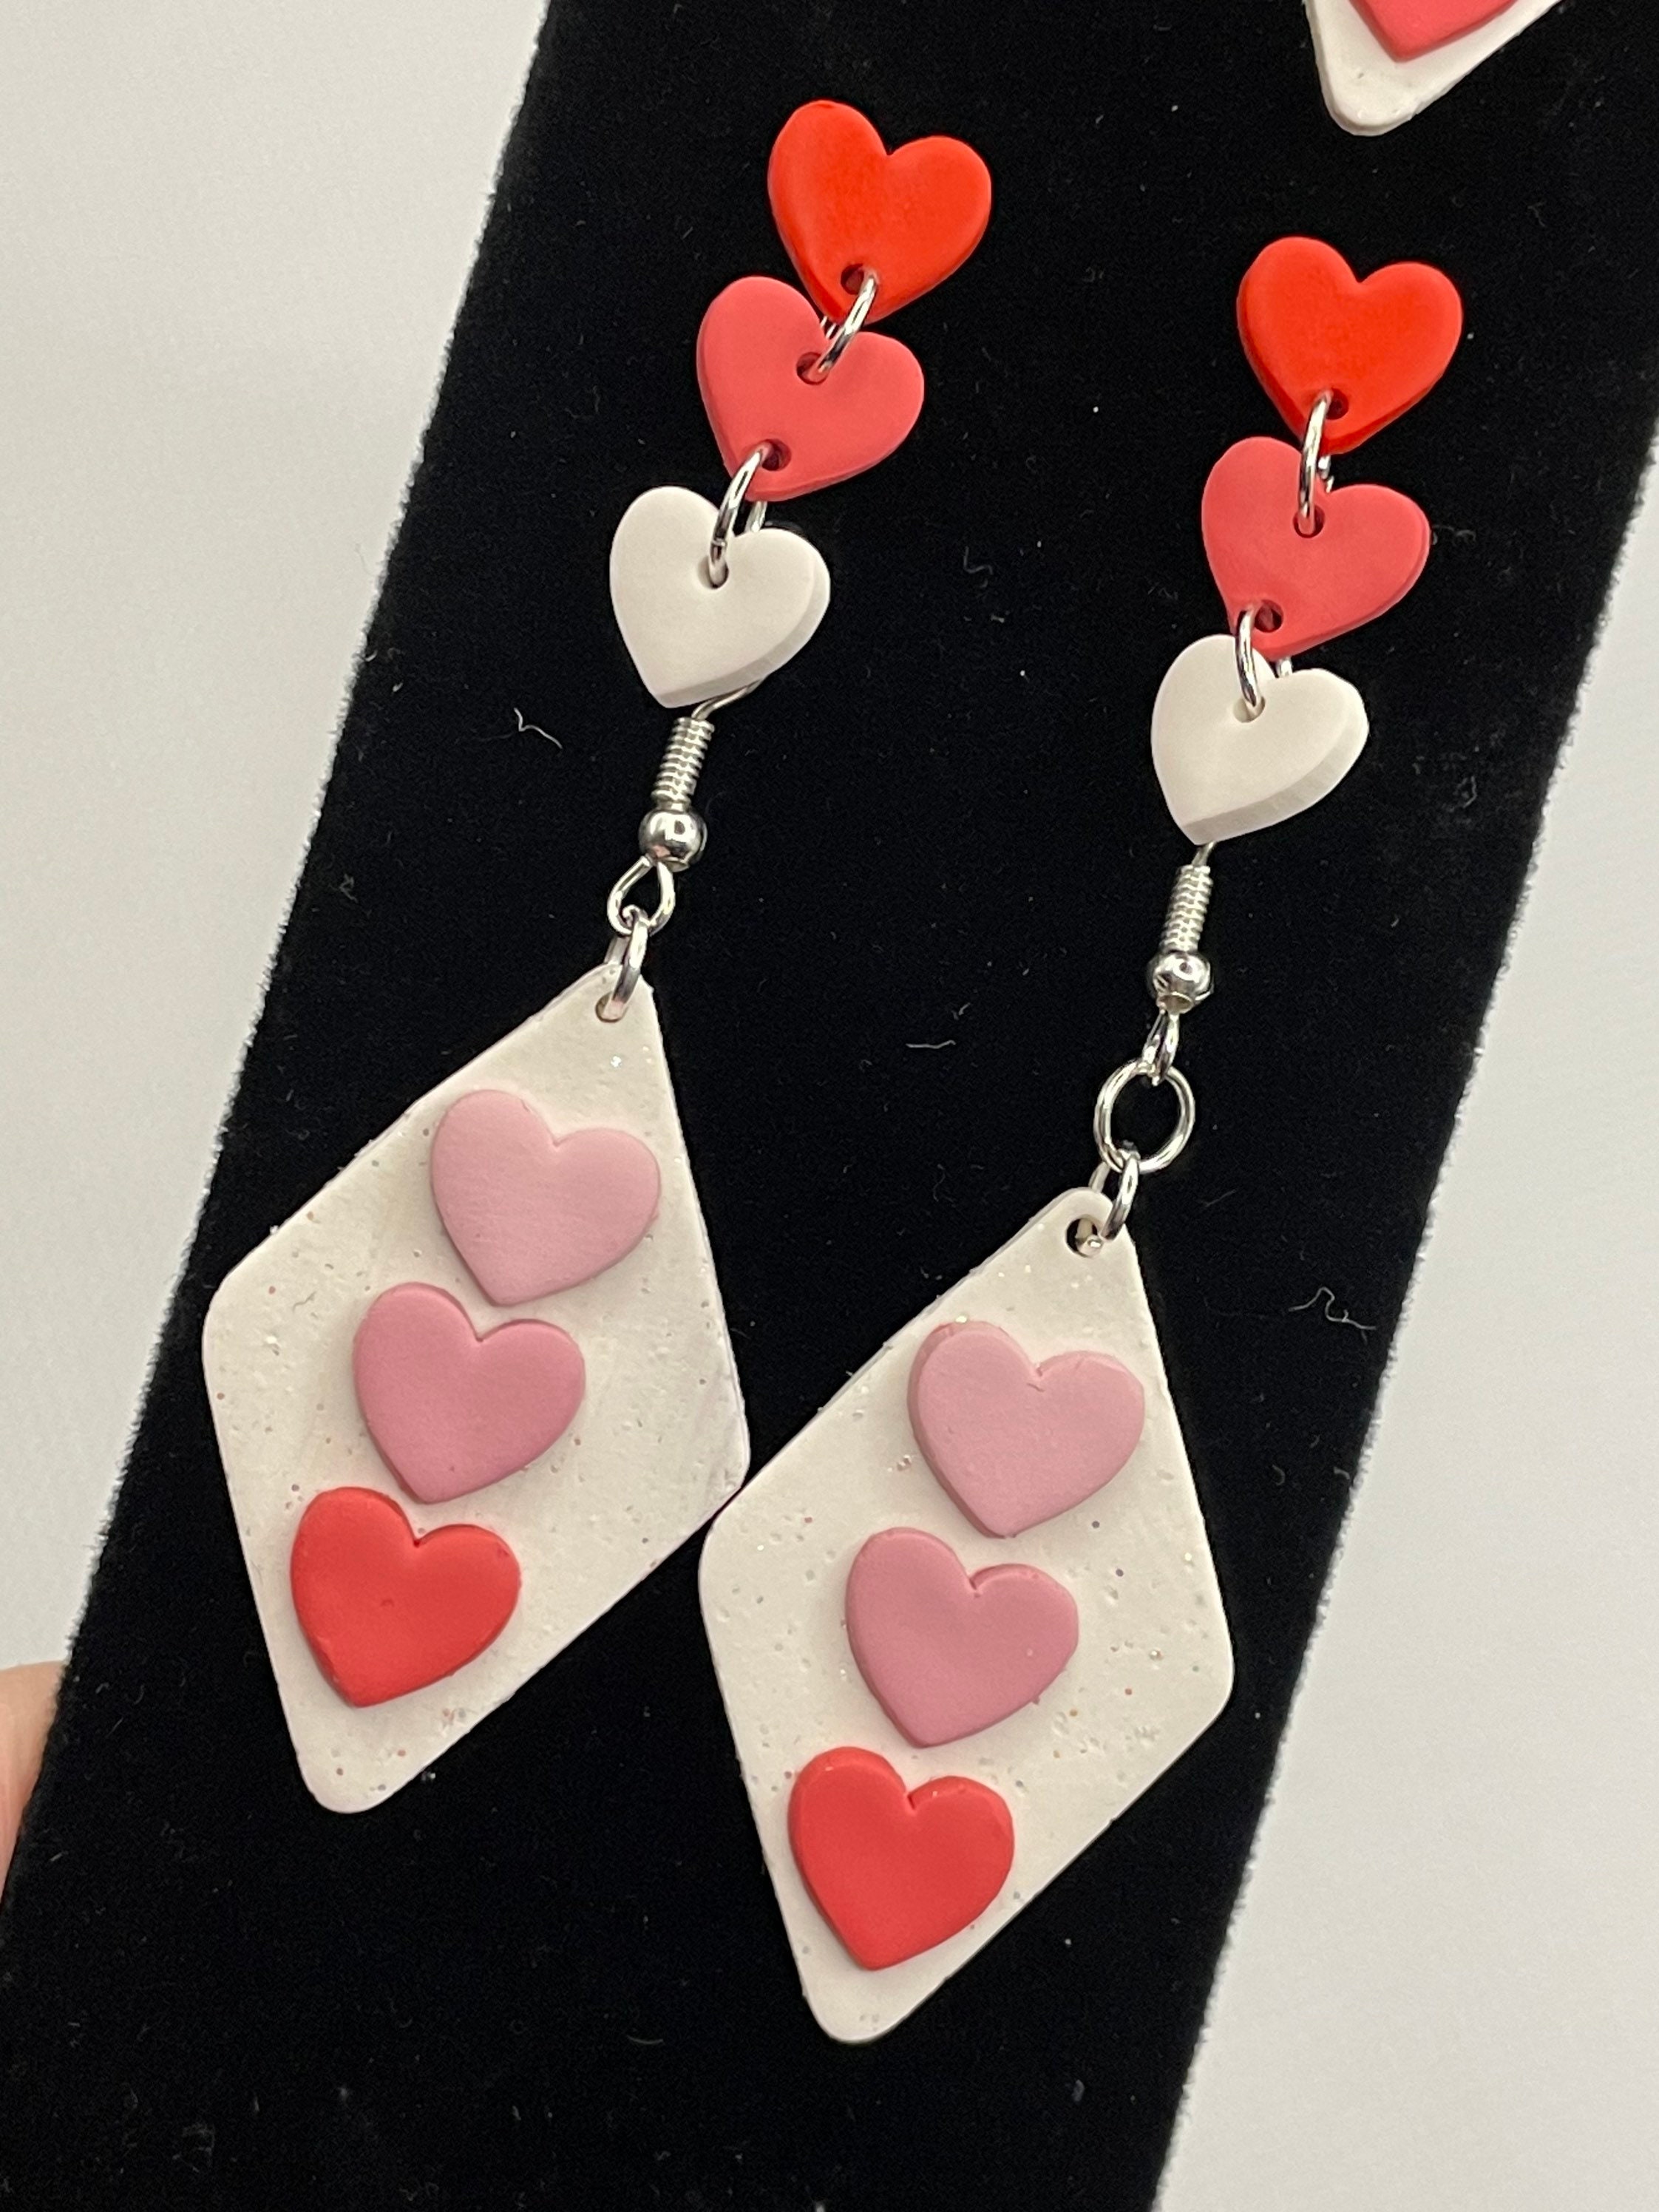 rainbow earrings Valentine’s Day earrings pink and white earrings red